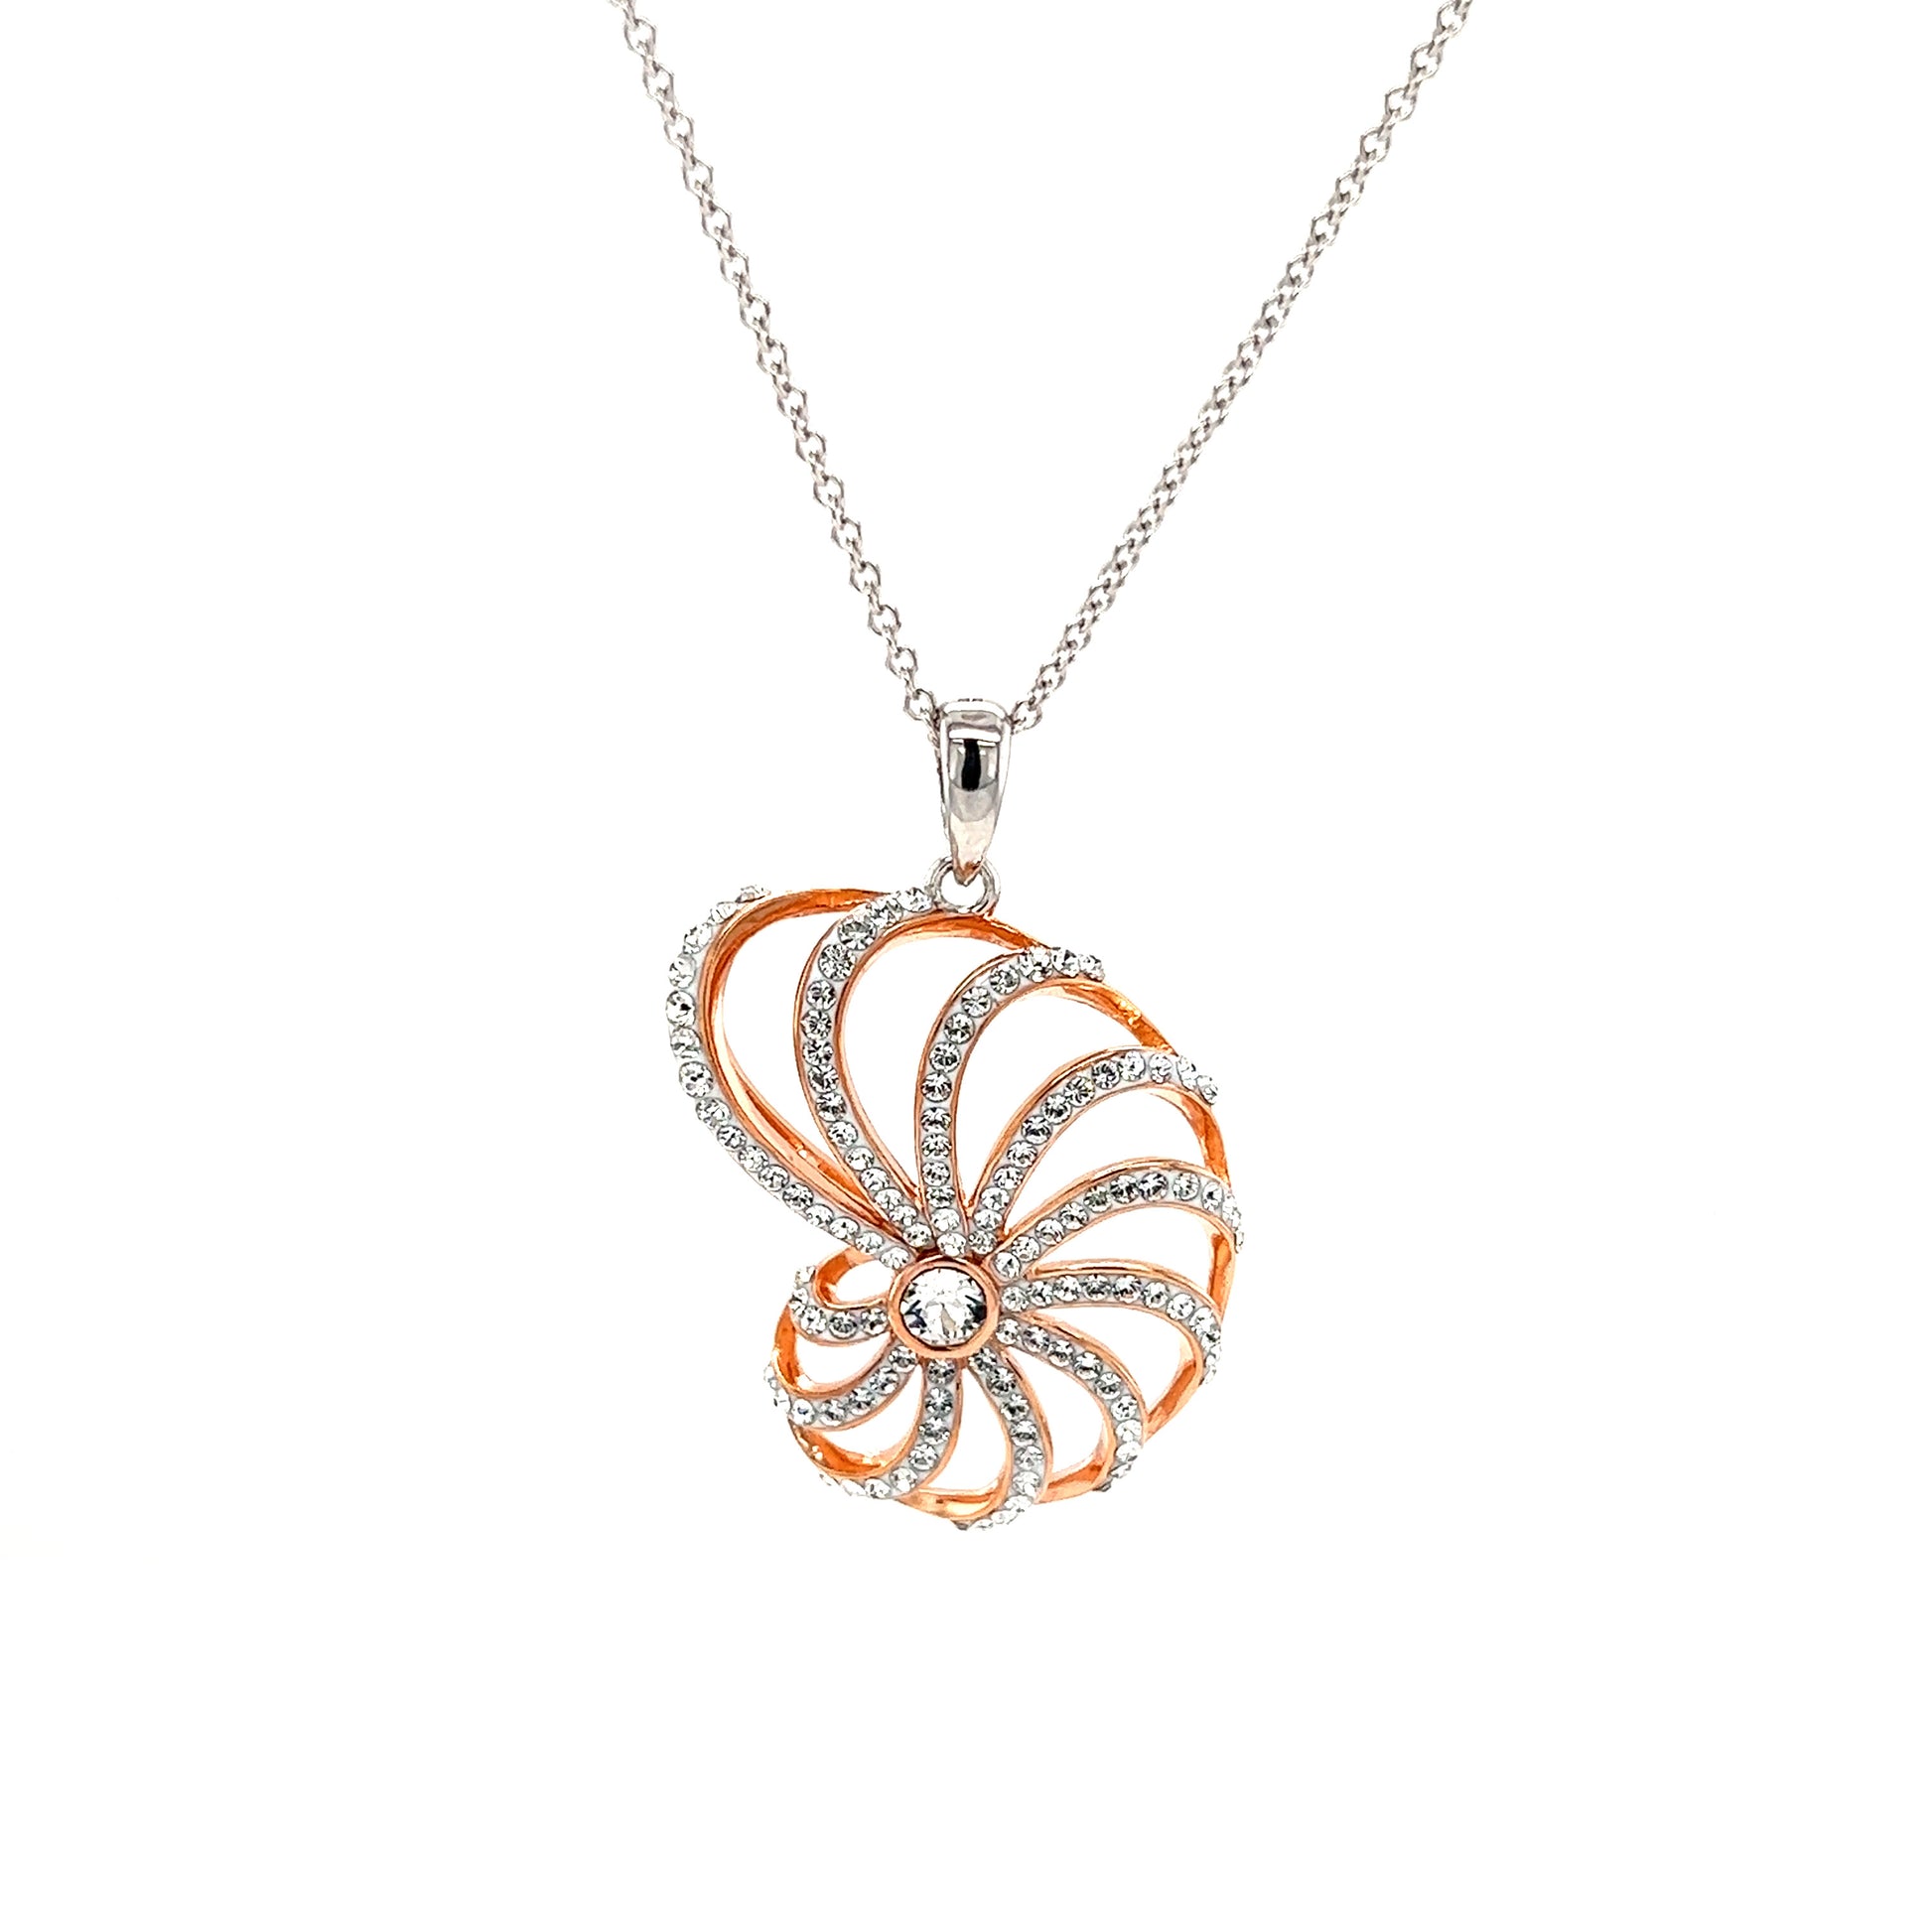 Nautilus Shell Necklace with Rose Gold Plate and White Crystals in Sterling Silver Front View